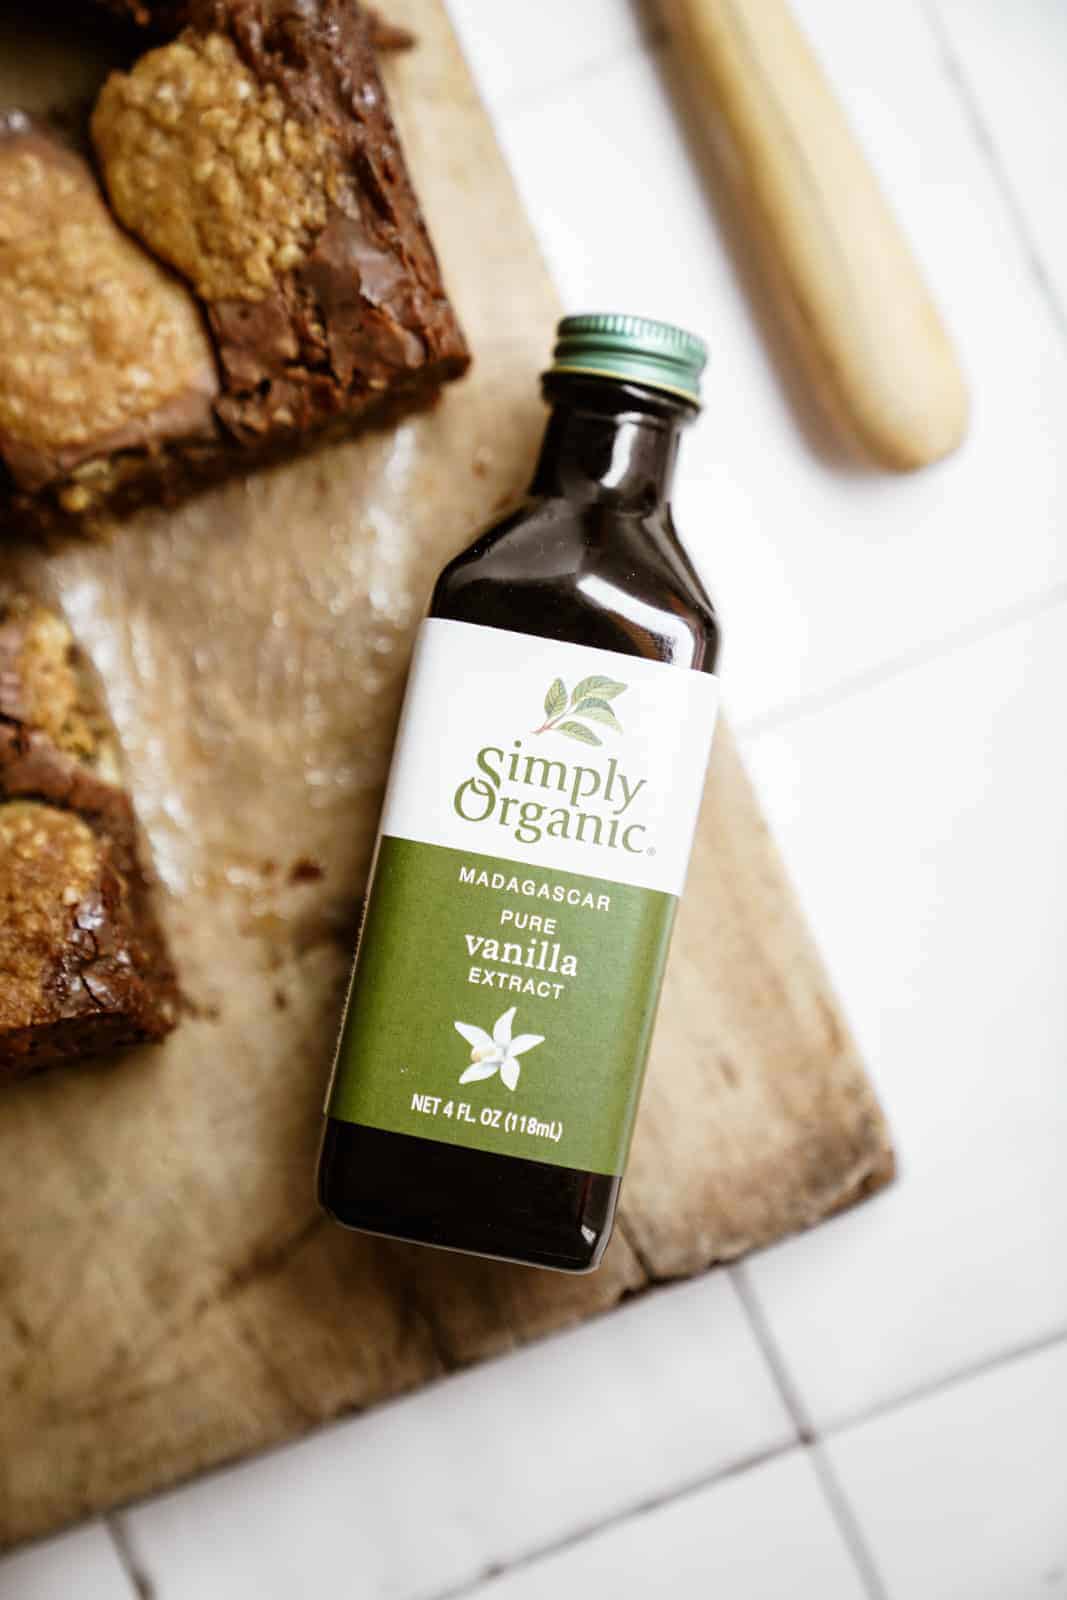 Bottle of Simply Organic Pure Vanilla Extract next to Oatmeal Fudge Bars